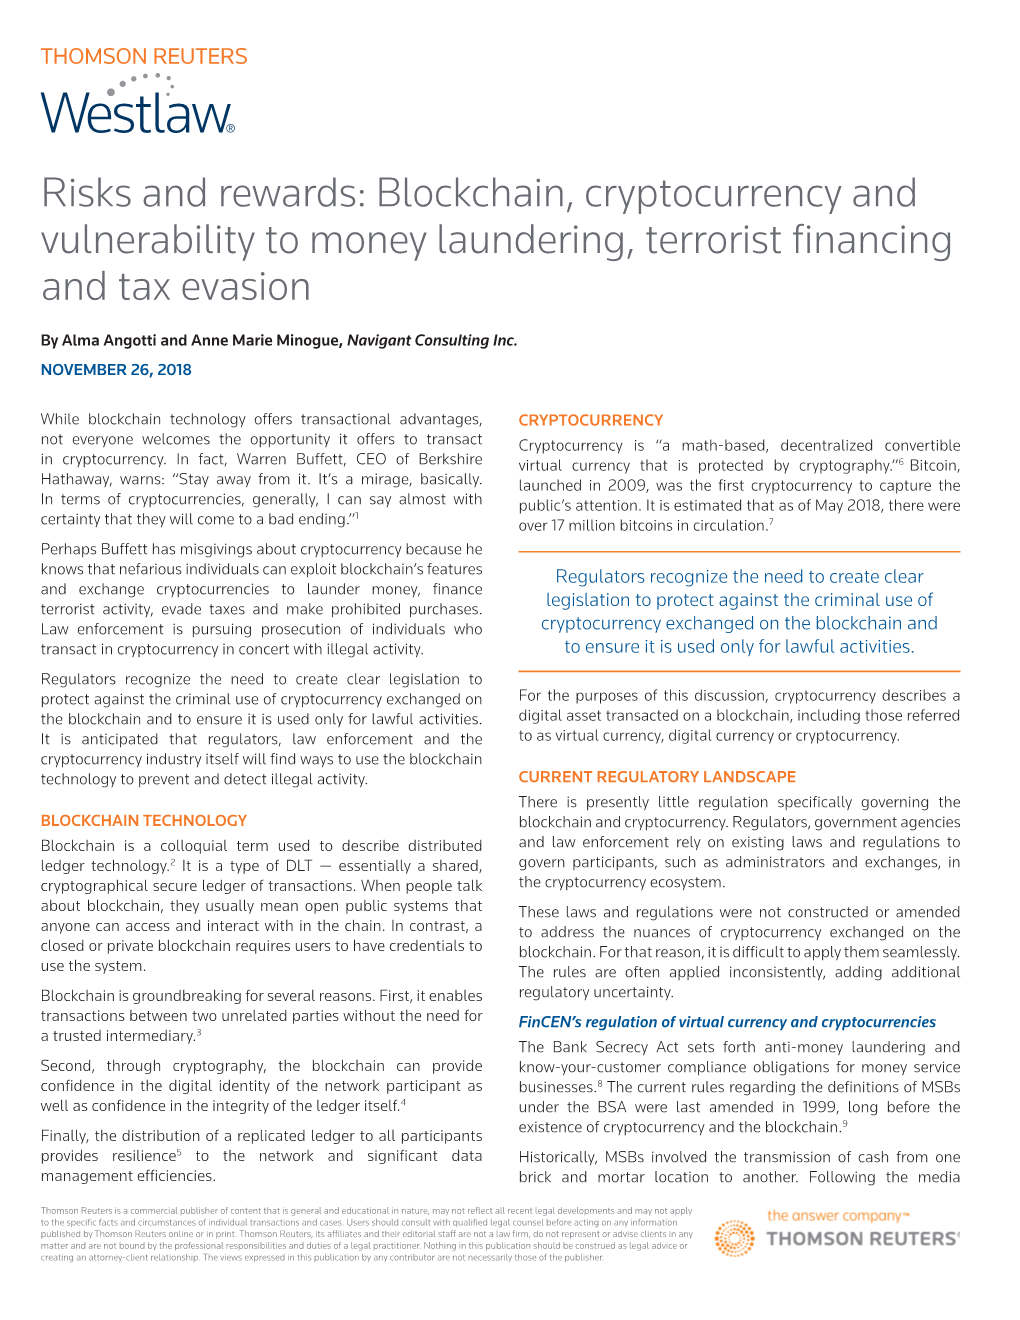 Blockchain, Cryptocurrency and Vulnerability to Money Laundering, Terrorist Financing and Tax Evasion